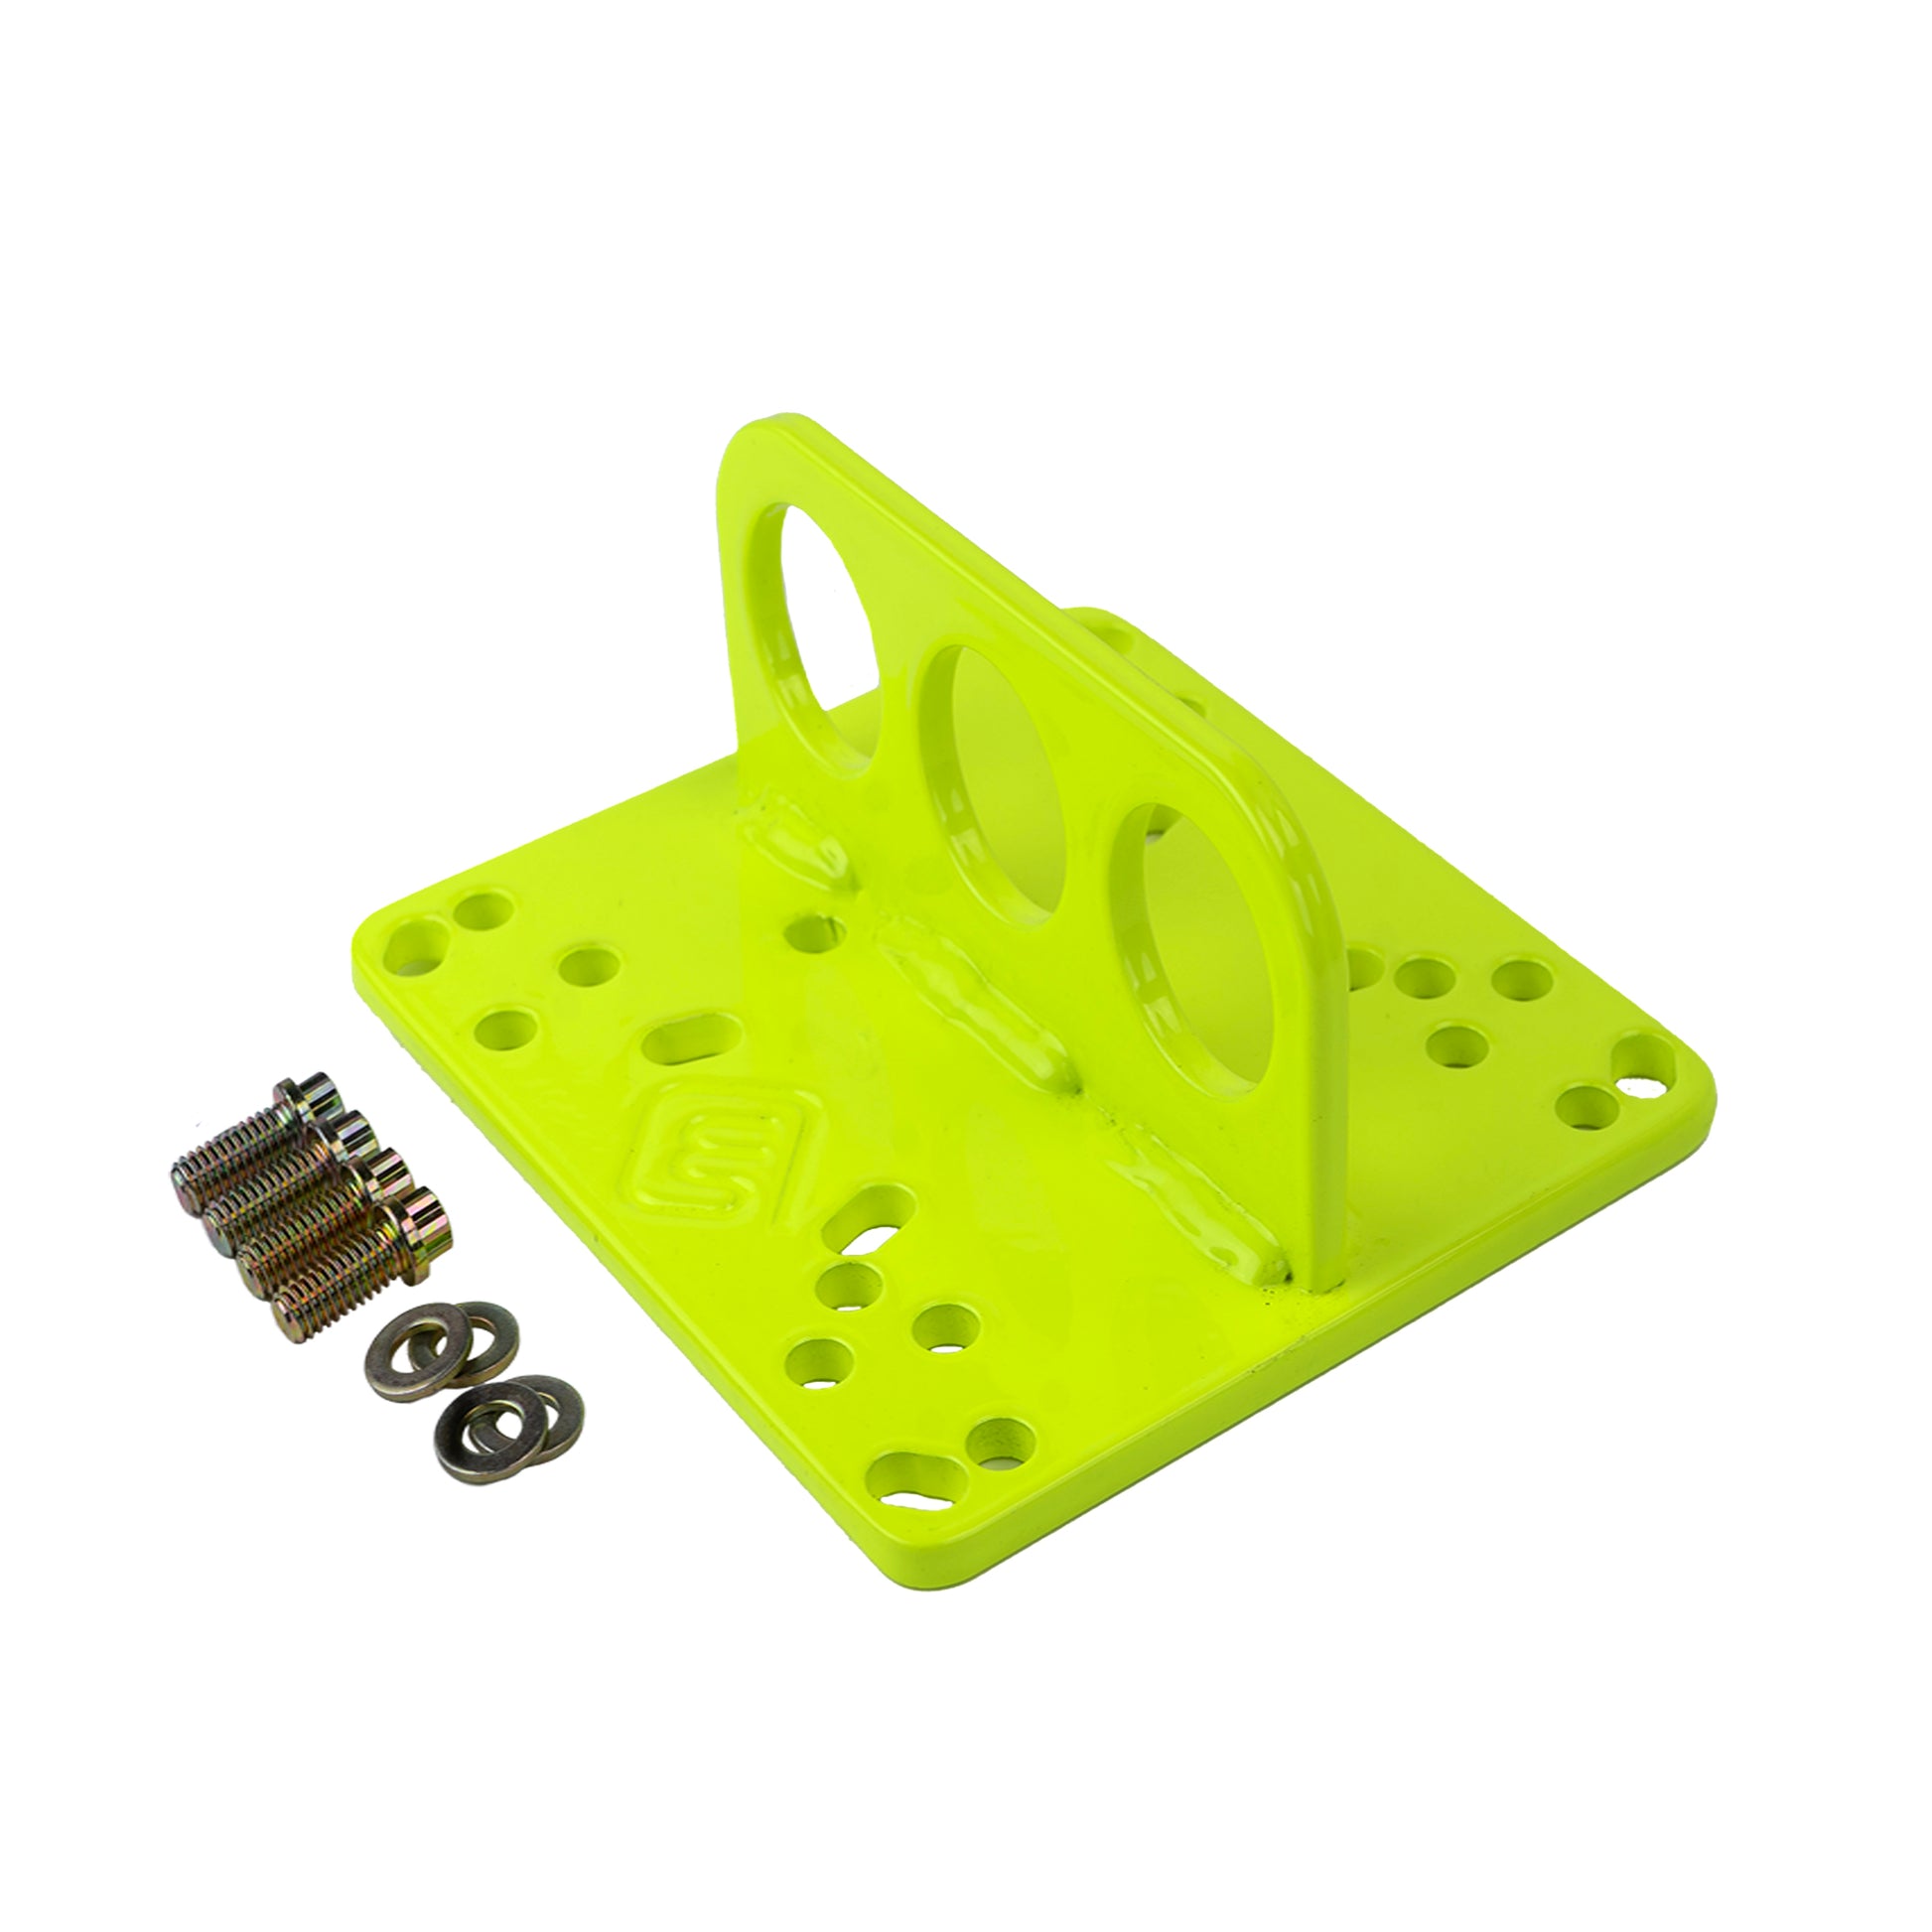 engineliftplates universal lift plate in highlighter yellow